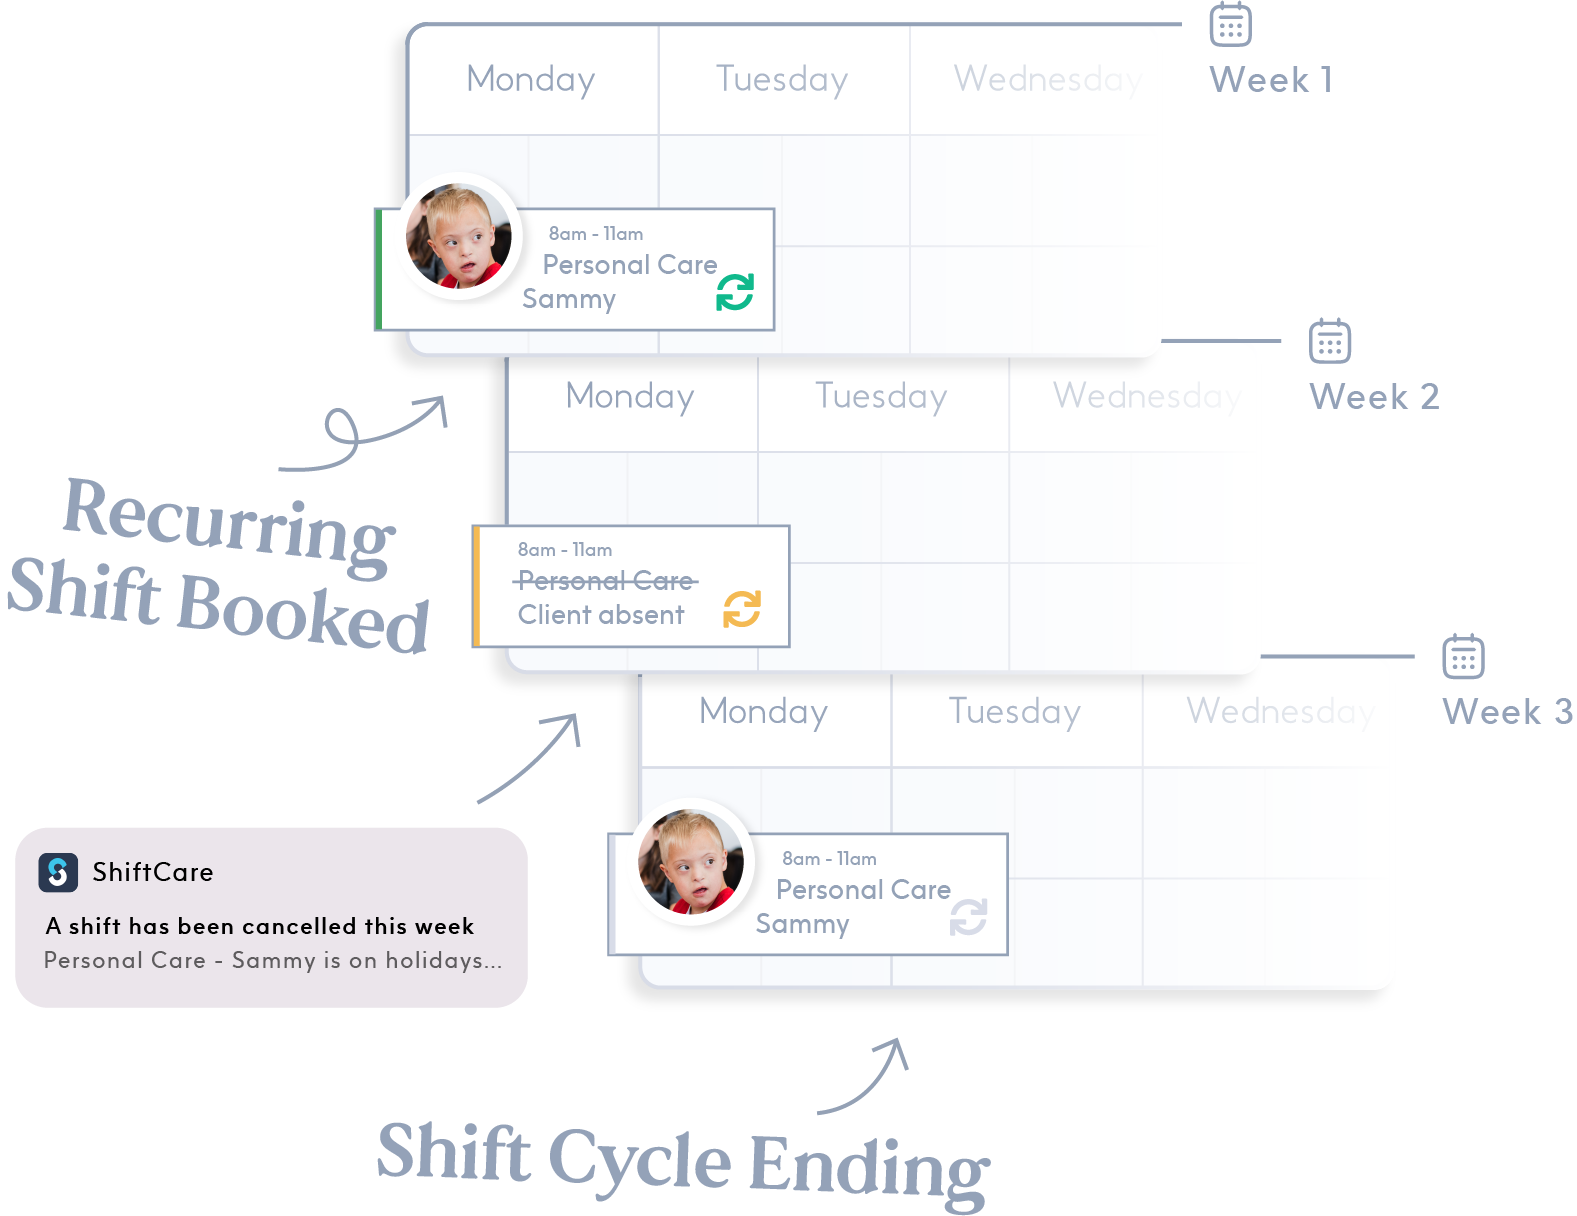 ShiftCare's schedule features including booking recurring shifts, notifications for cancelled shifts, and cancelling shift cycles